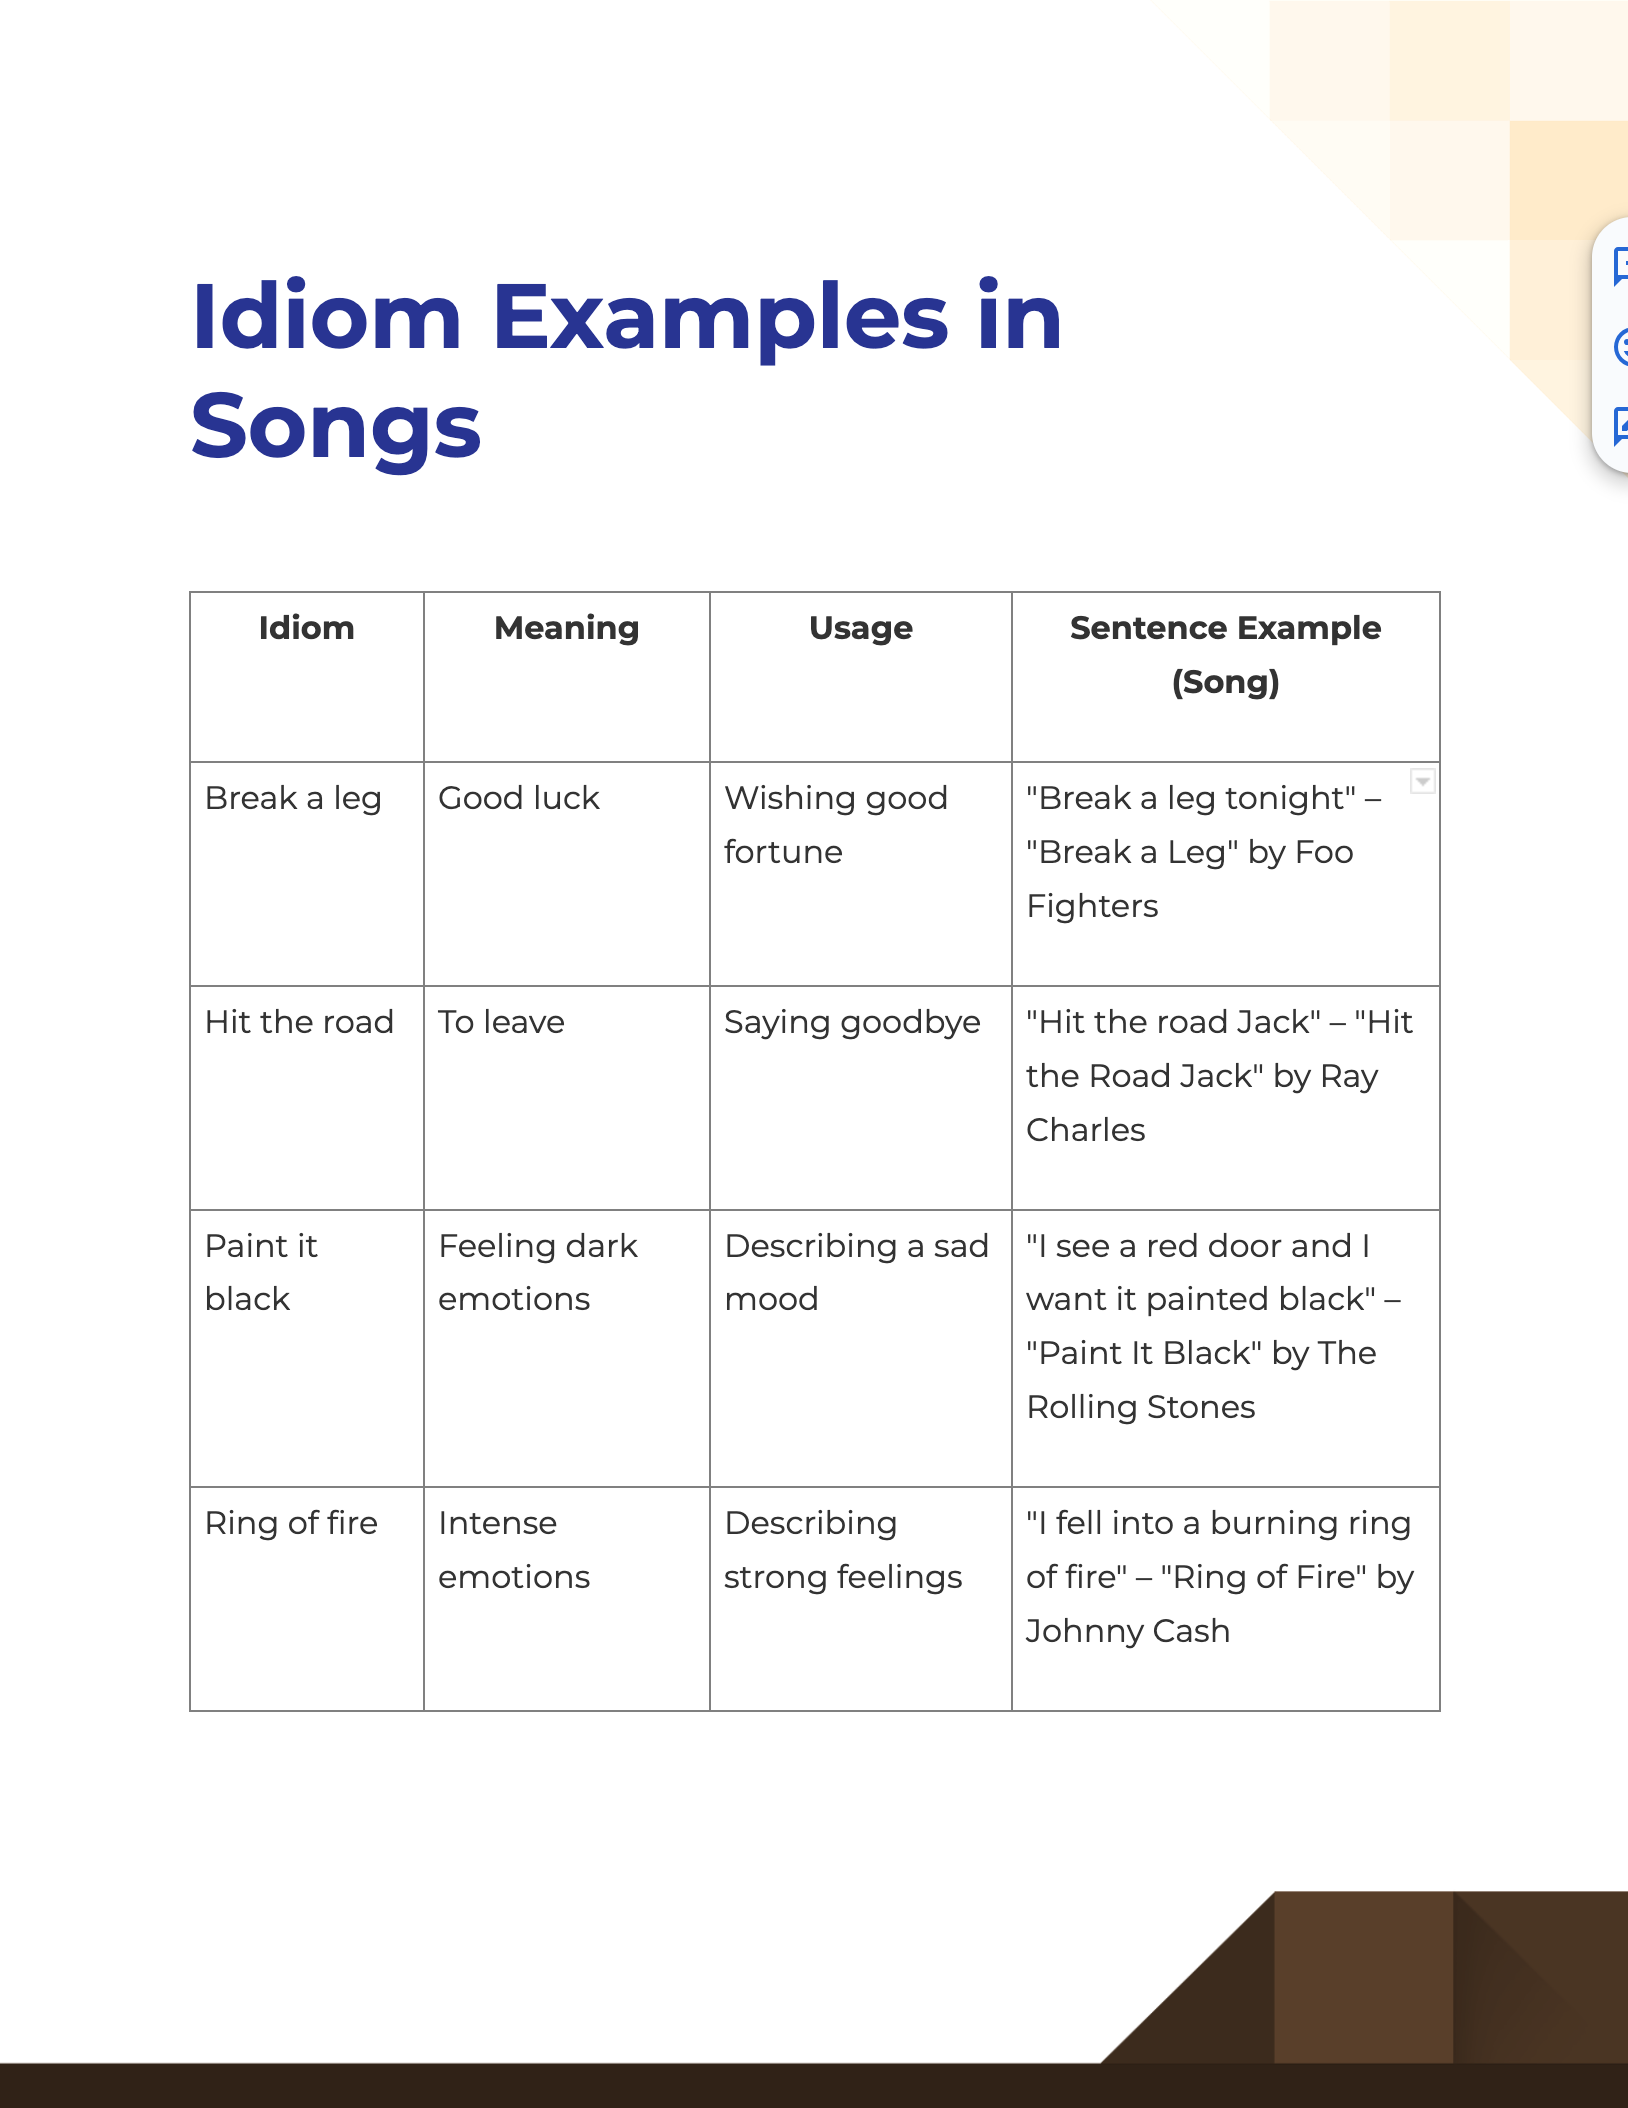 idiom examples in songs1